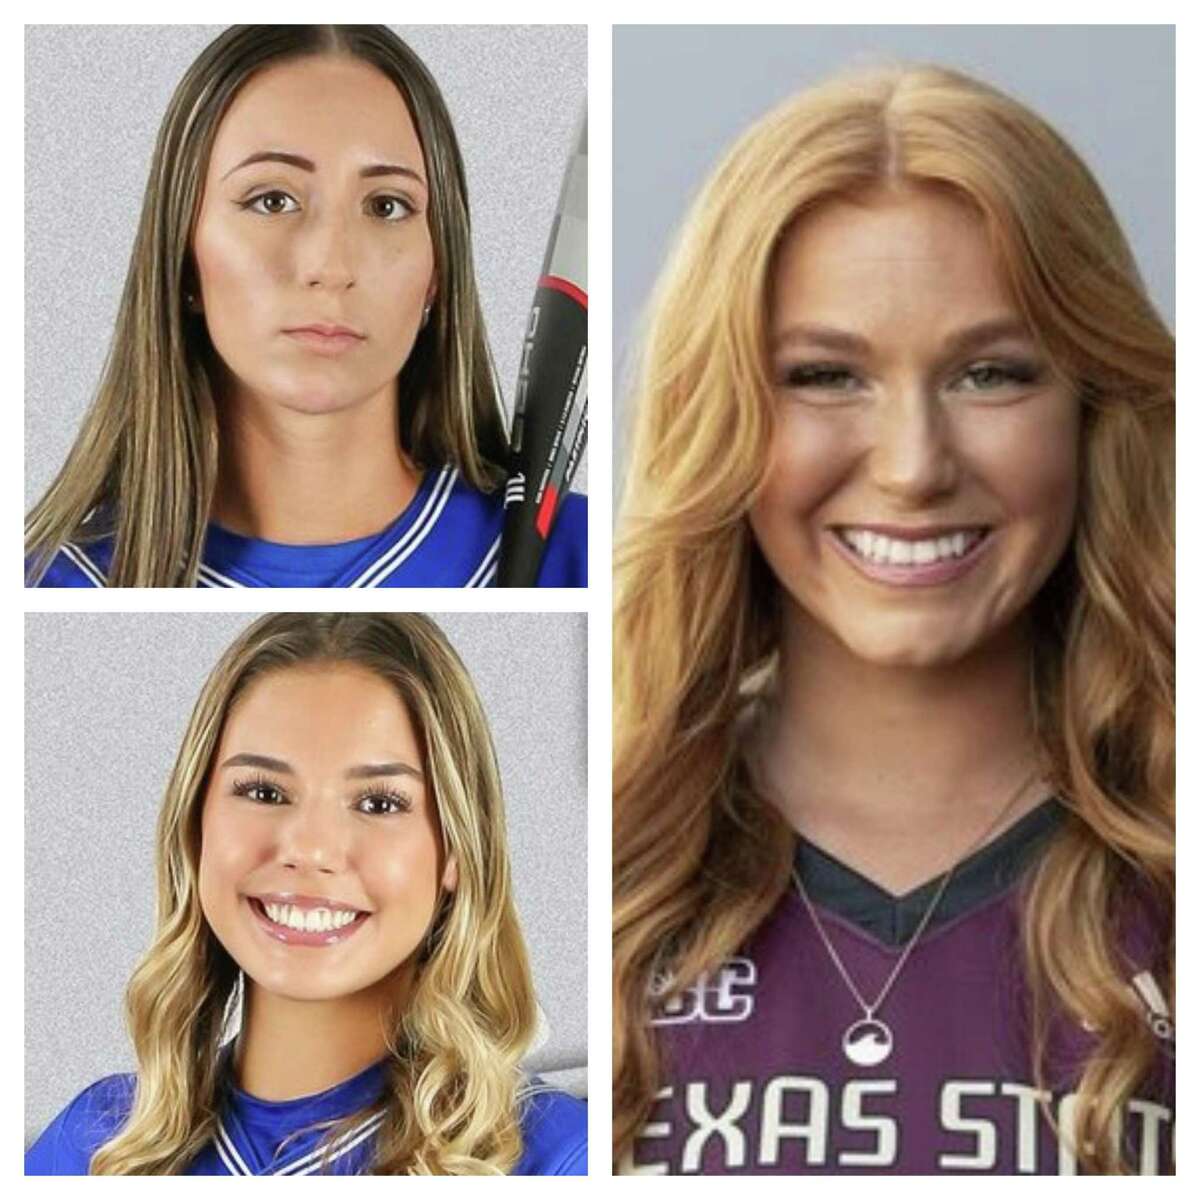 McNeese State softball players Alayis Seneca (top left), Ashley Valejo (bottom right) and Texas State's Caitlyn Rogers (right) all were recognized by their respective conferences after big weeks on the field.